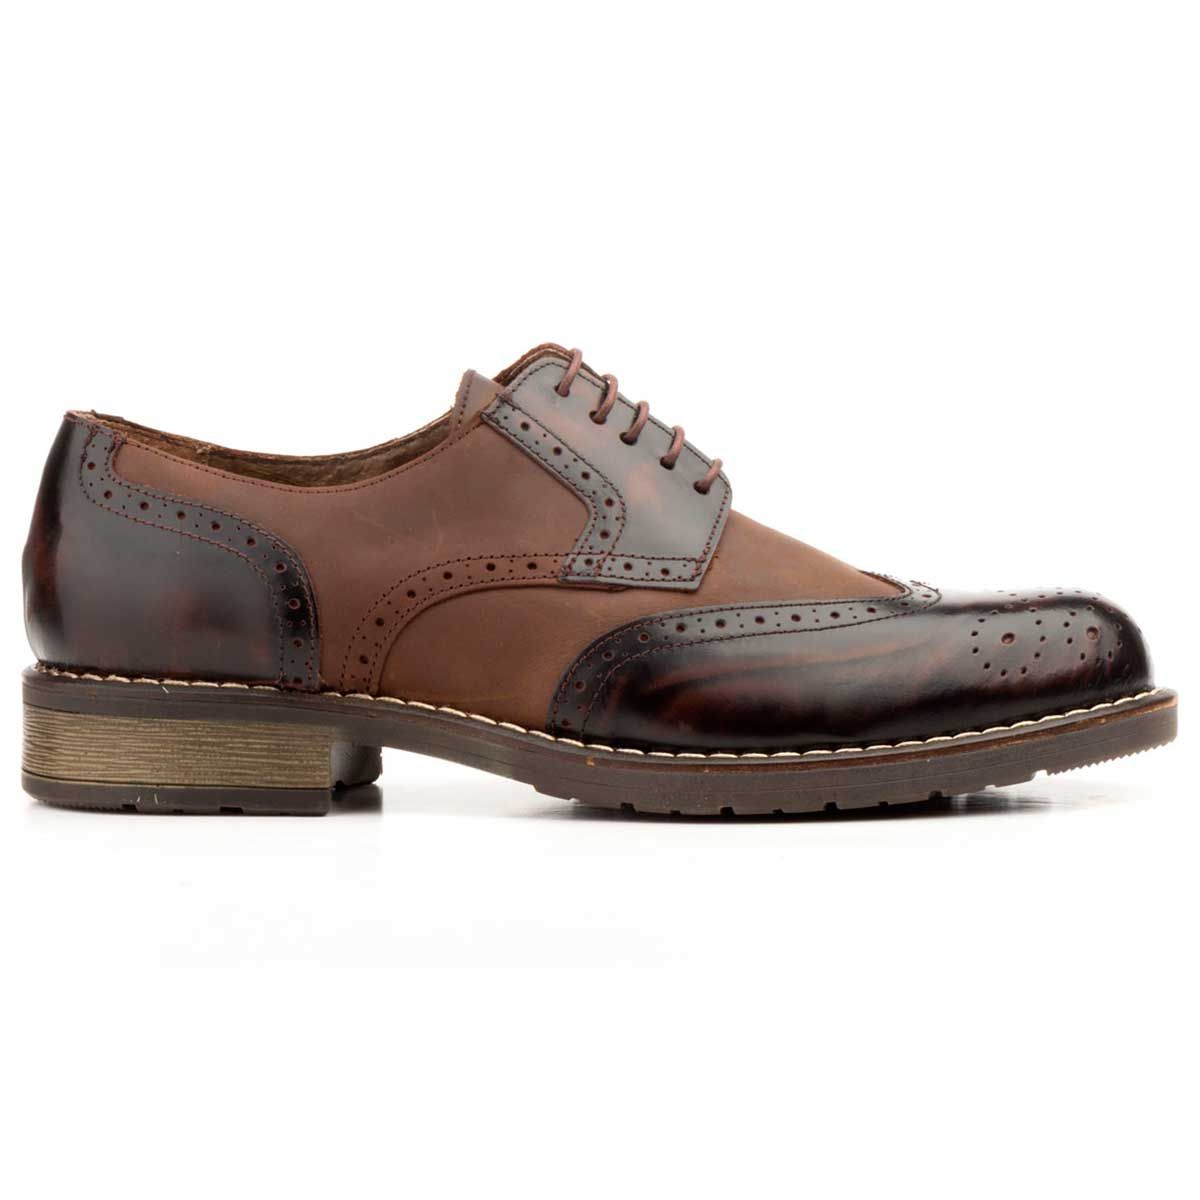 Men's Oxford shoes are characterized by their formal character, despite this, at present, with the insertion and mix of the Sport and Formal style, the looks with which to combine these men's shoes is multiplied. In this way they are perfect to combine with jacket suit, with shirt and gabardine E, even, with jeans and sweaters. Remember that the Oxford man shoes are from the most elegant and if you do not know what you choose for a special occasion, Oxford shoes will save you. We show you an oxford with cords, a basic that can not be missing in your closet.